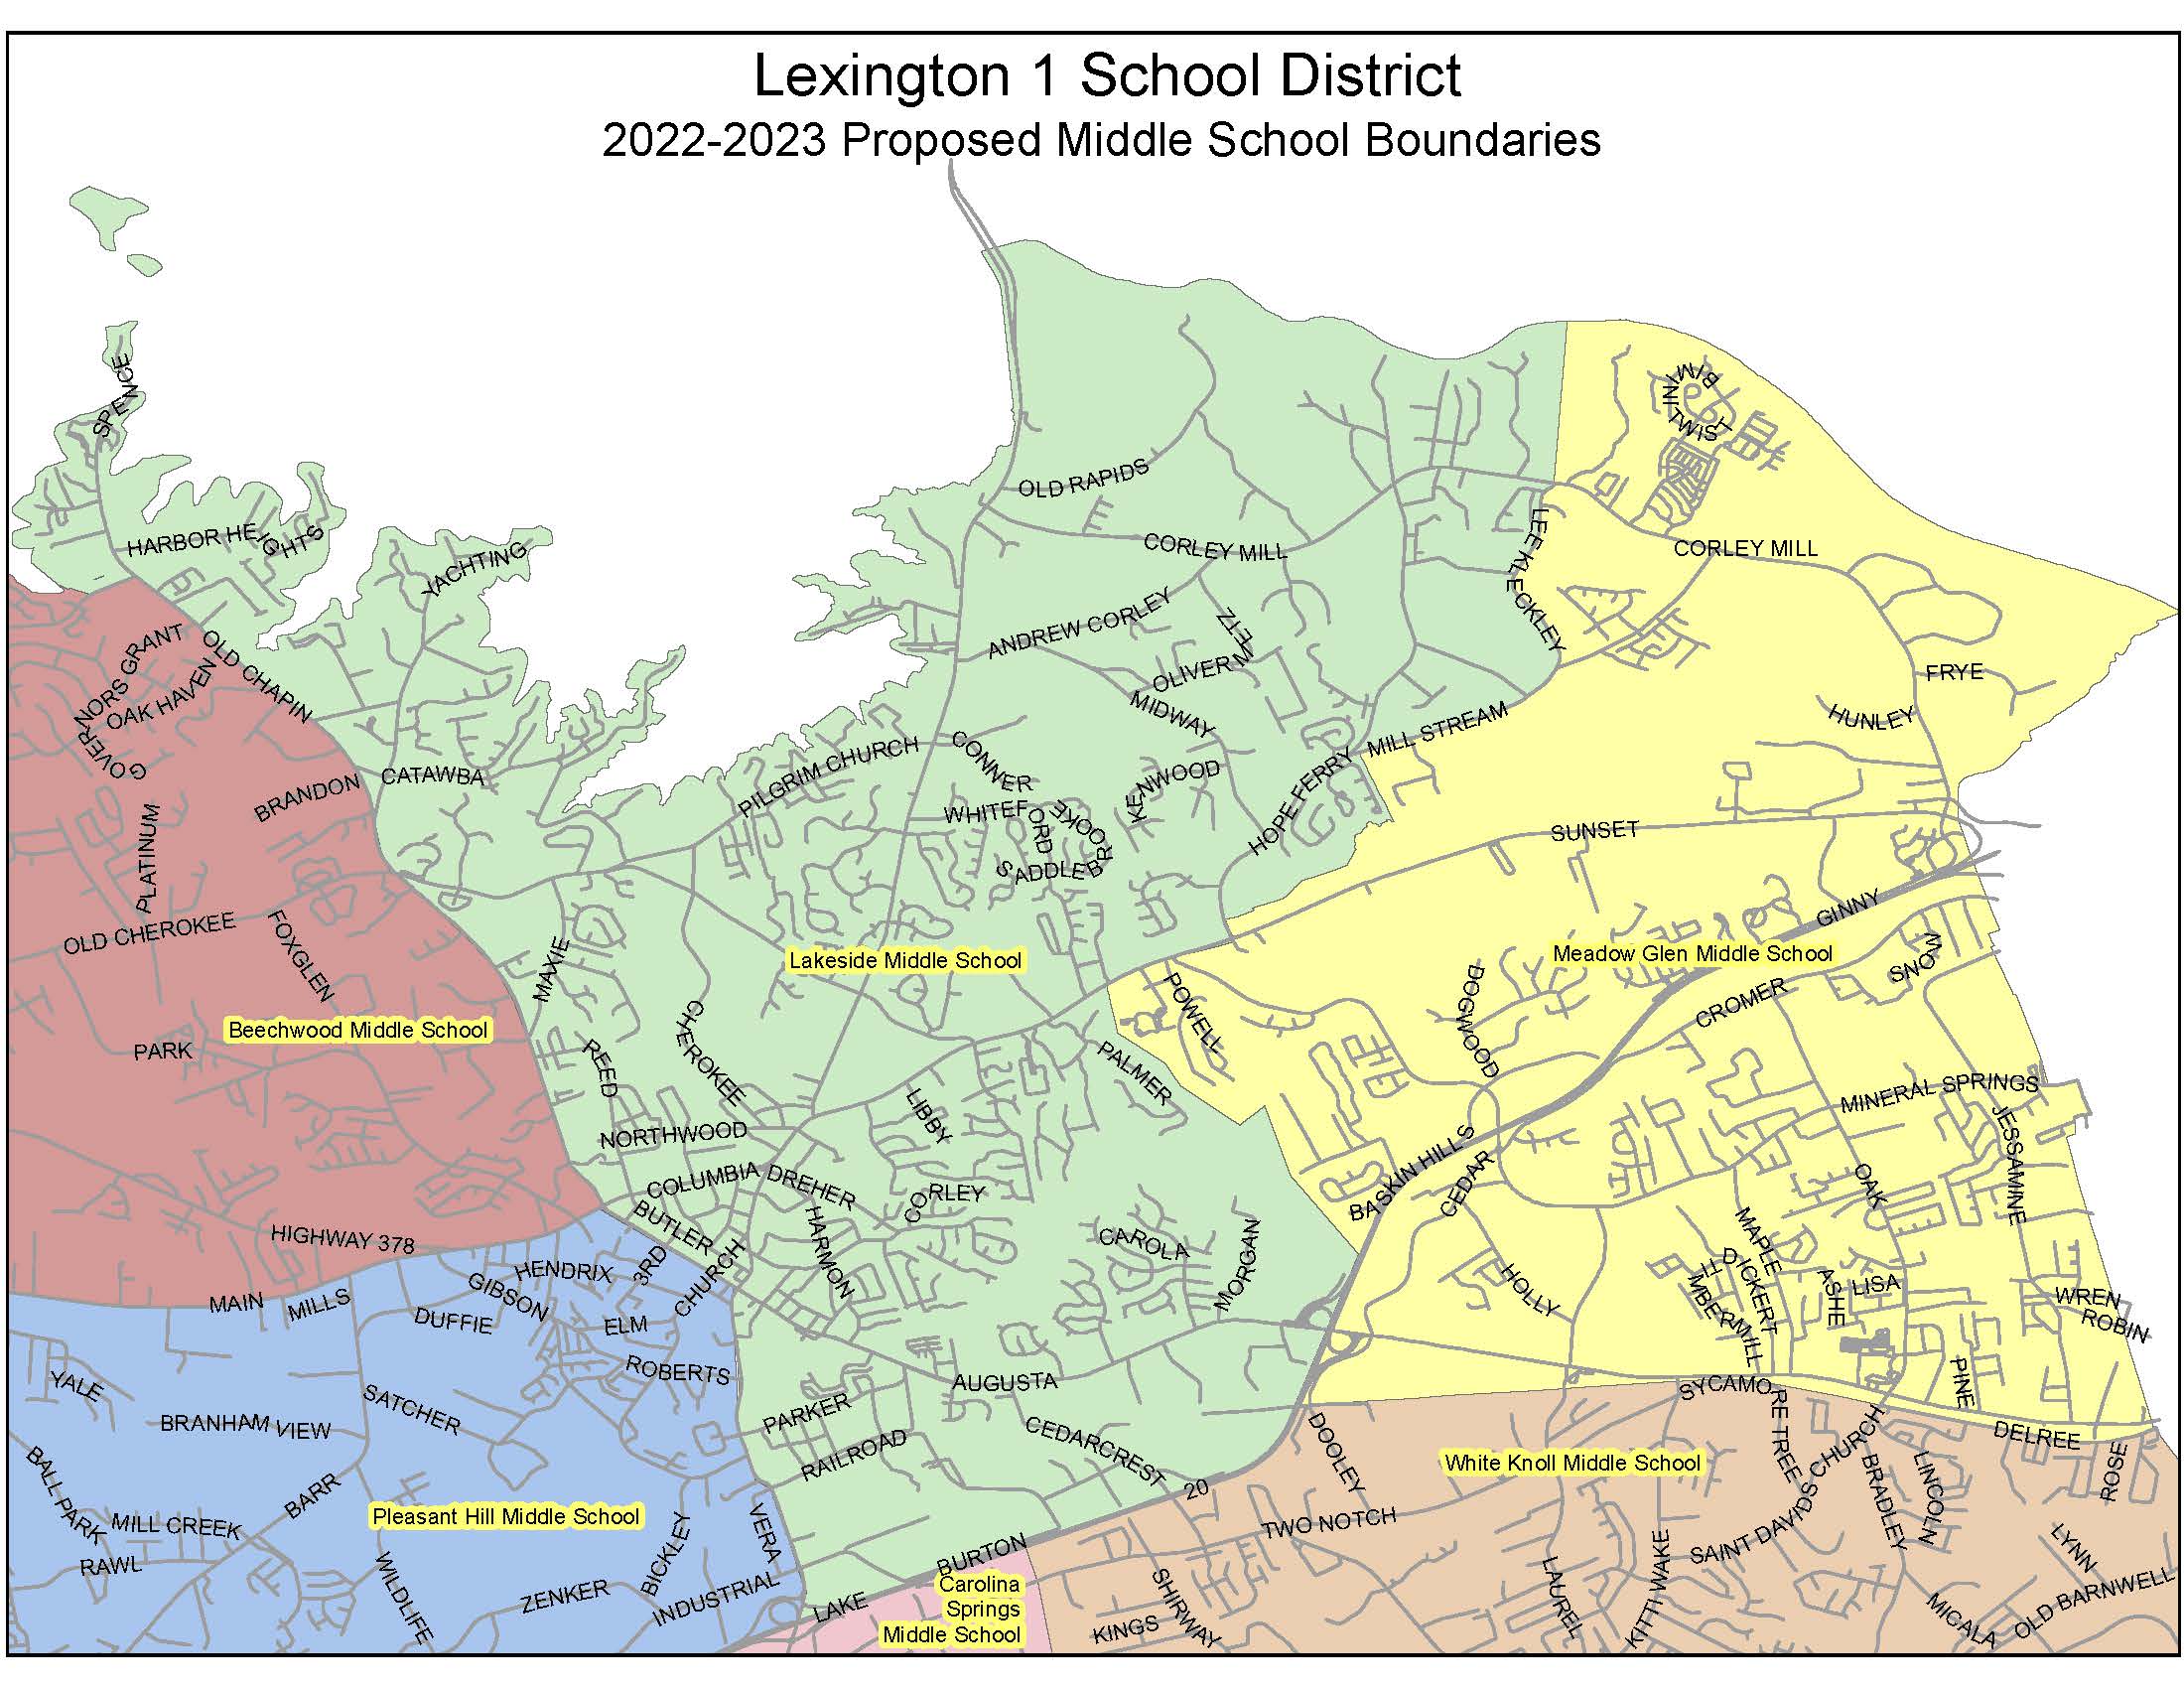 Proposed Middle School Boundaries